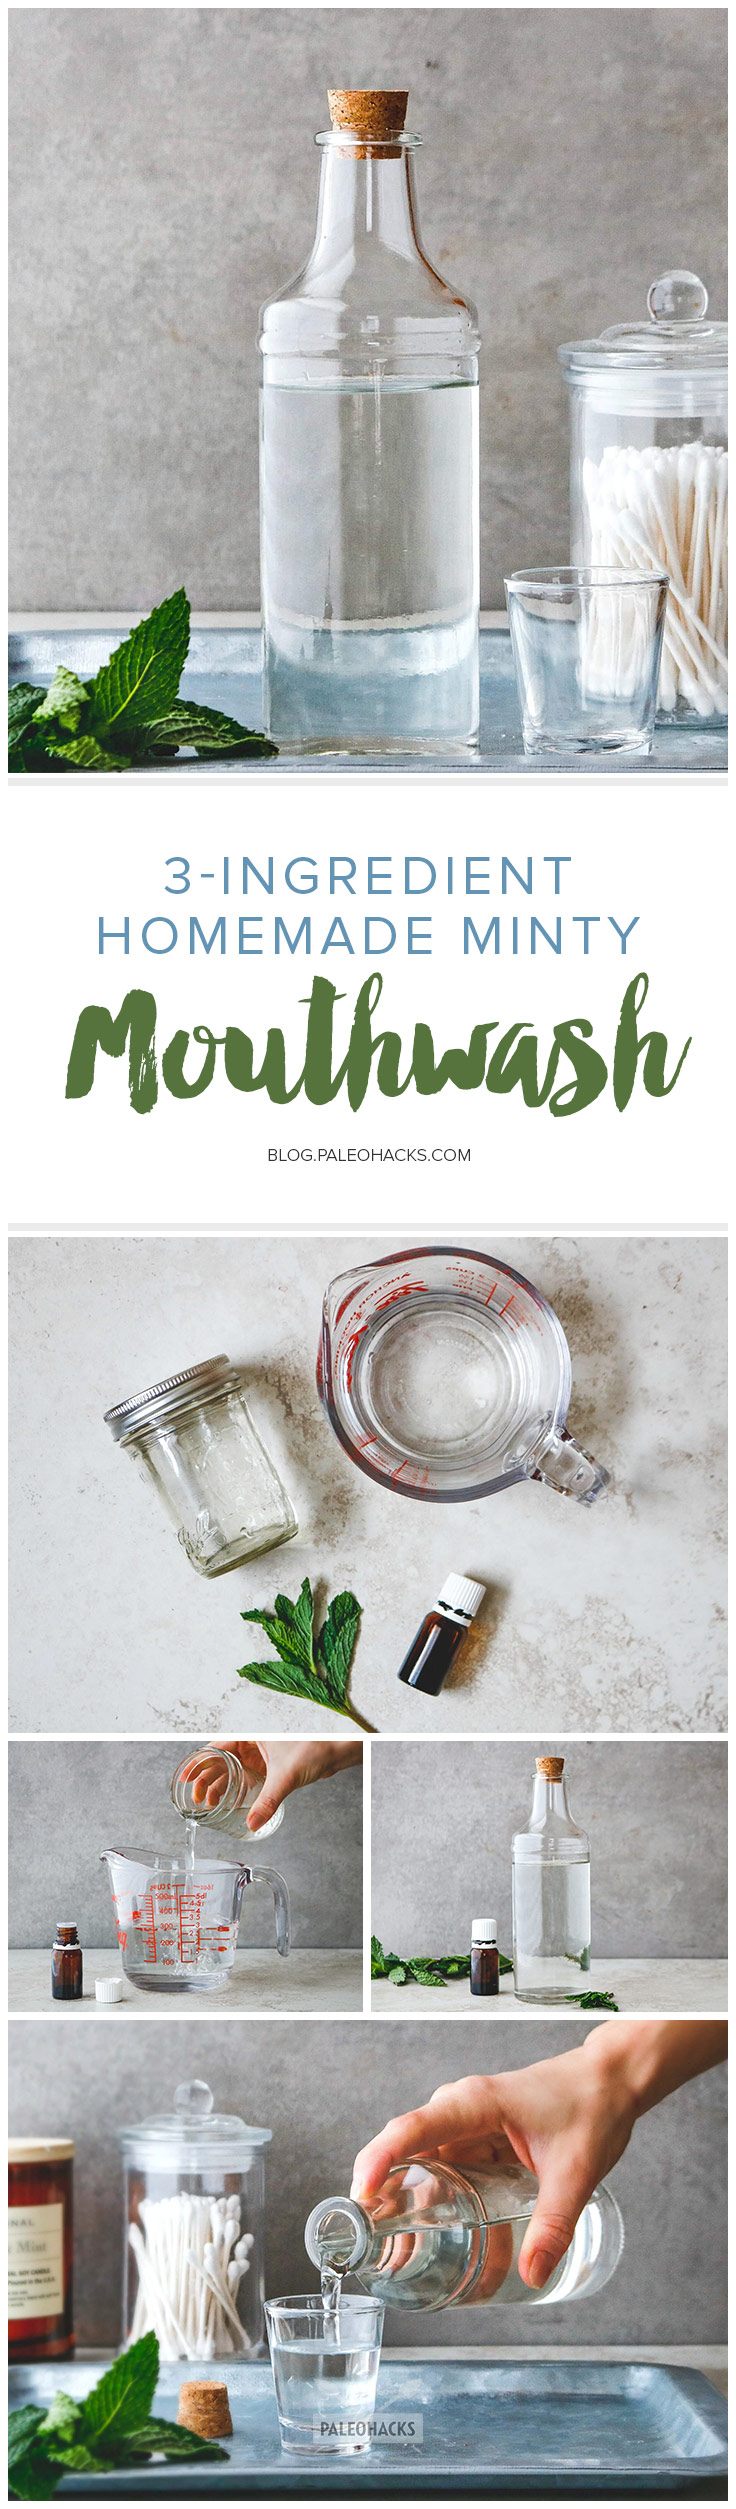 Give store-bought brands the boot with this natural homemade Minty Mouthwash. Bad breath doesn't stand a chance with this natural recipe.